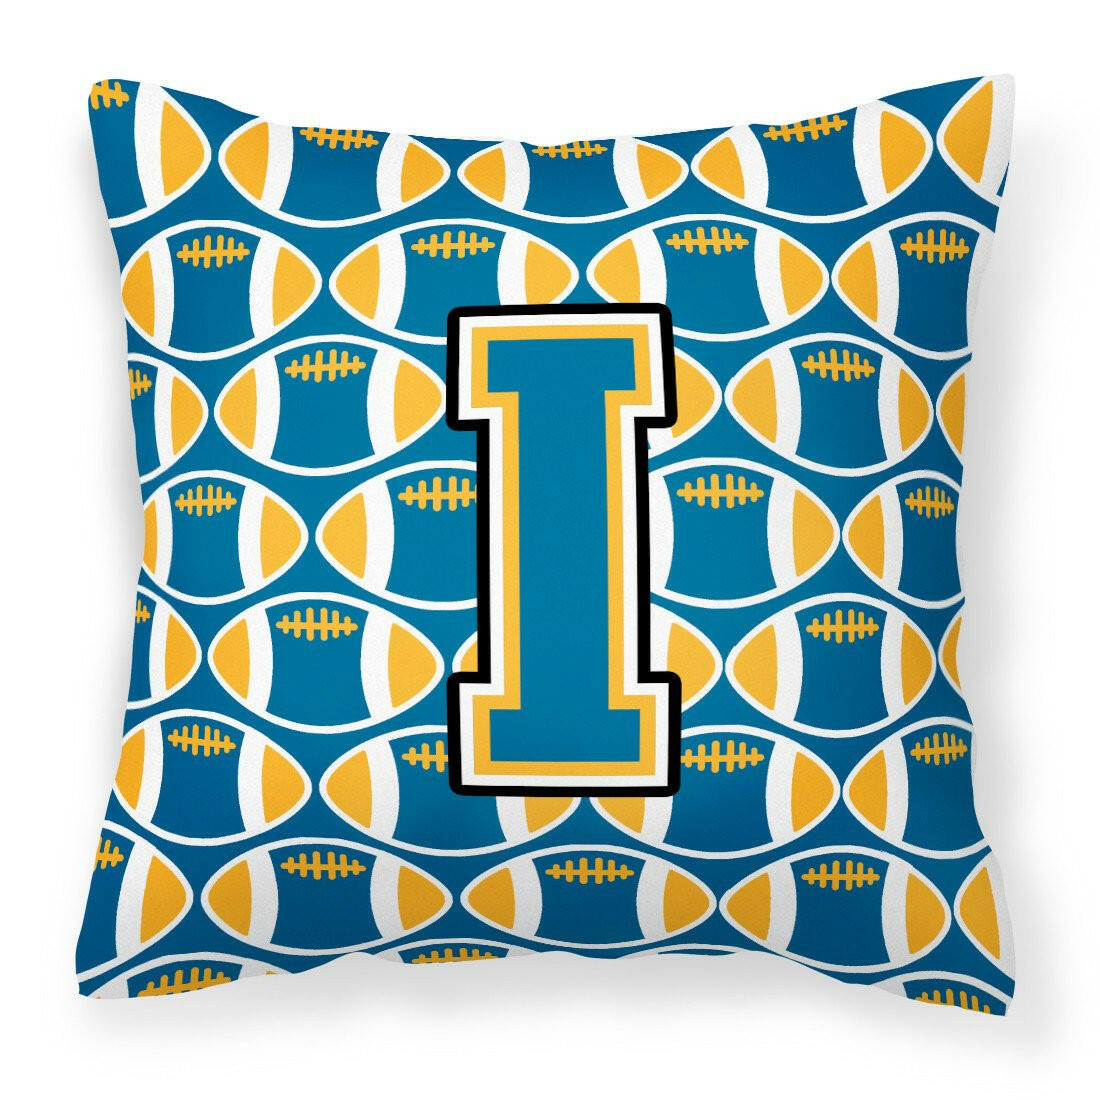 Letter I Football Blue and Gold Fabric Decorative Pillow CJ1077-IPW1414 by Caroline's Treasures